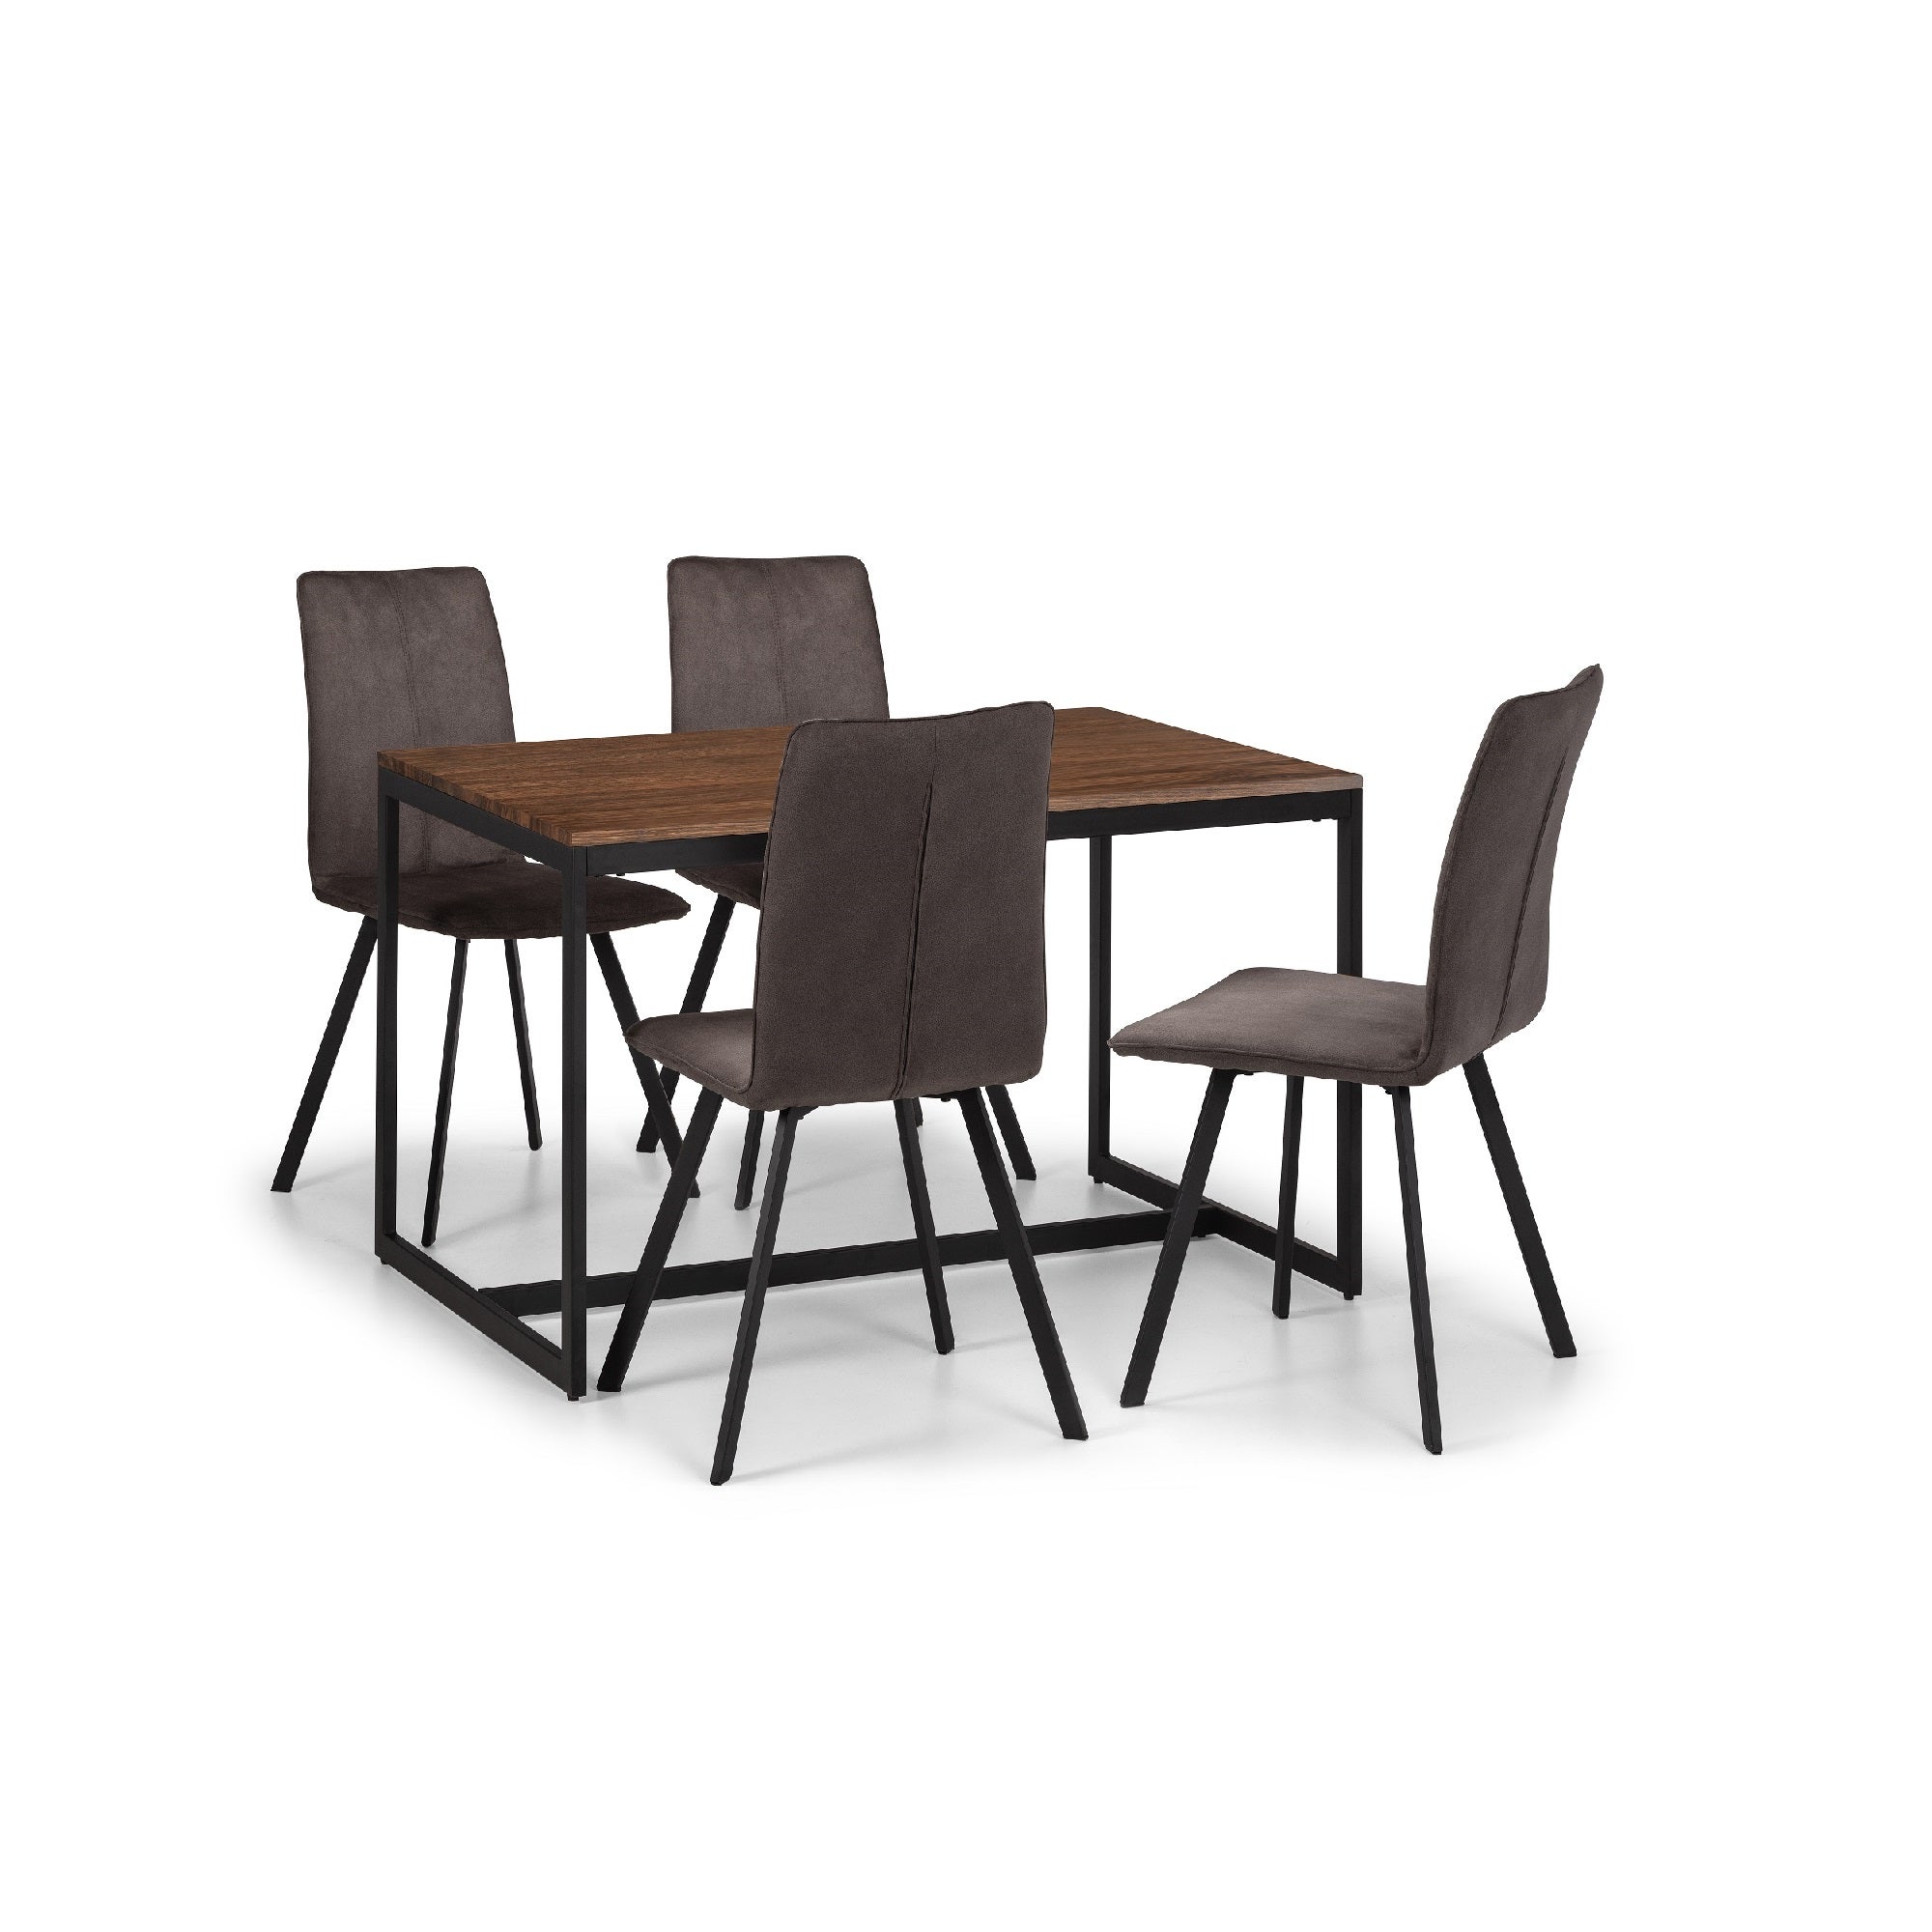 Tribeca Rectangular Dining Table With 4 Monroe Chairs Brown Brown